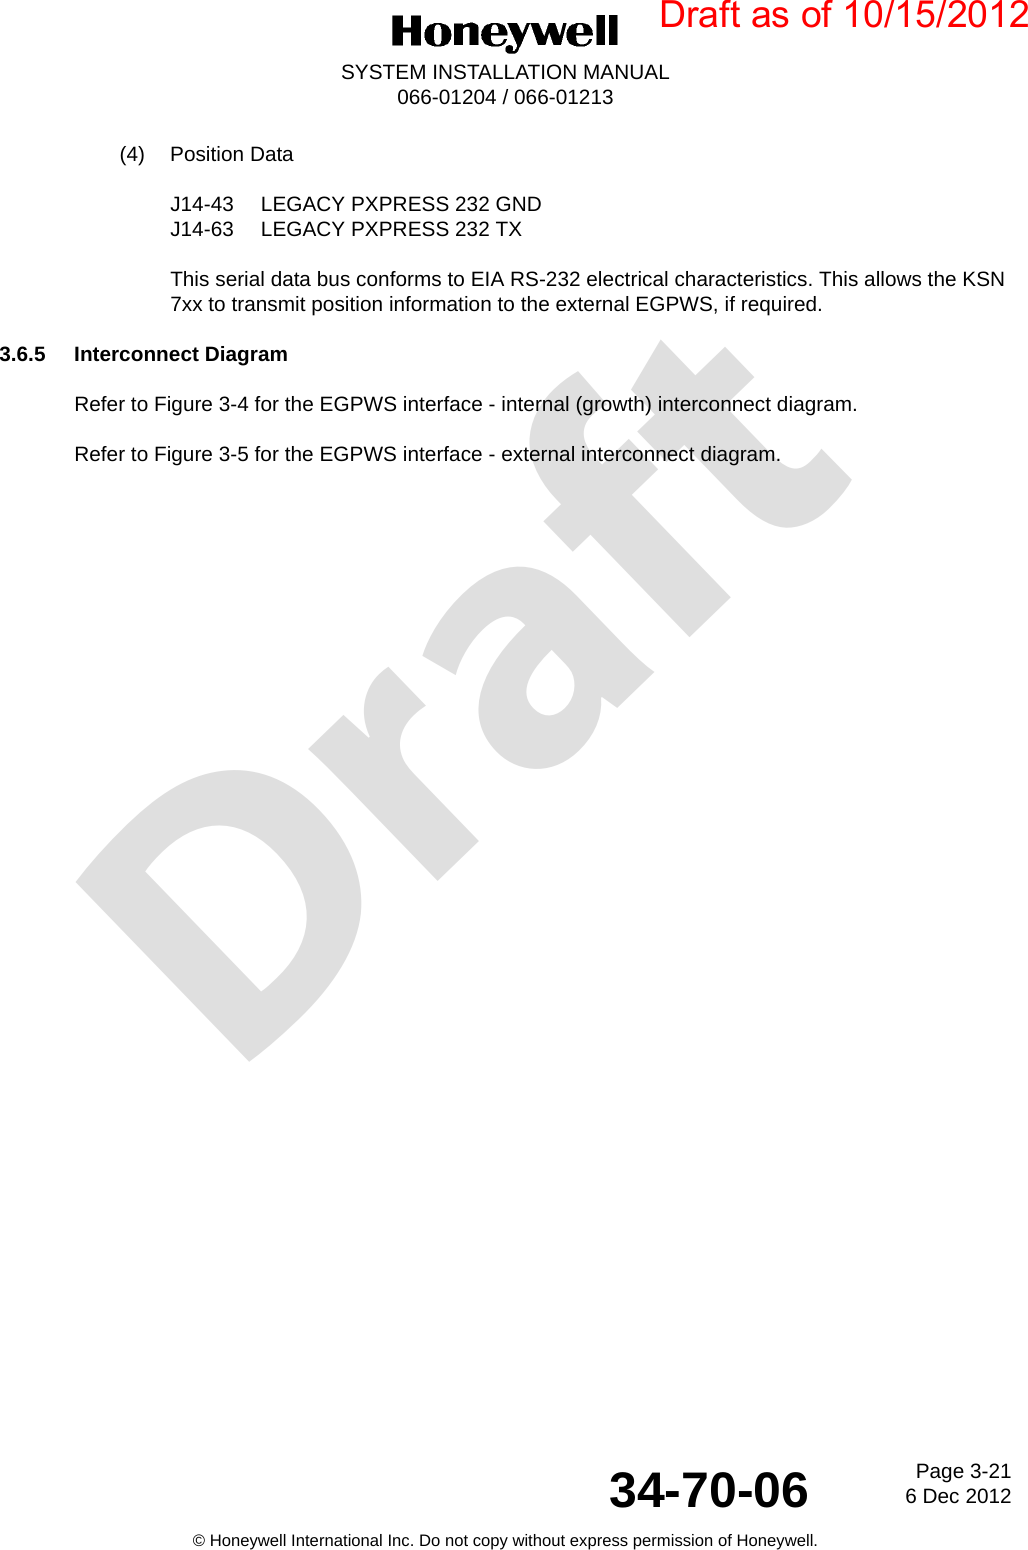 DraftPage 3-216 Dec 201234-70-06SYSTEM INSTALLATION MANUAL066-01204 / 066-01213© Honeywell International Inc. Do not copy without express permission of Honeywell.(4) Position DataJ14-43 LEGACY PXPRESS 232 GNDJ14-63 LEGACY PXPRESS 232 TXThis serial data bus conforms to EIA RS-232 electrical characteristics. This allows the KSN 7xx to transmit position information to the external EGPWS, if required.3.6.5 Interconnect DiagramRefer to Figure 3-4 for the EGPWS interface - internal (growth) interconnect diagram.Refer to Figure 3-5 for the EGPWS interface - external interconnect diagram.Draft as of 10/15/2012